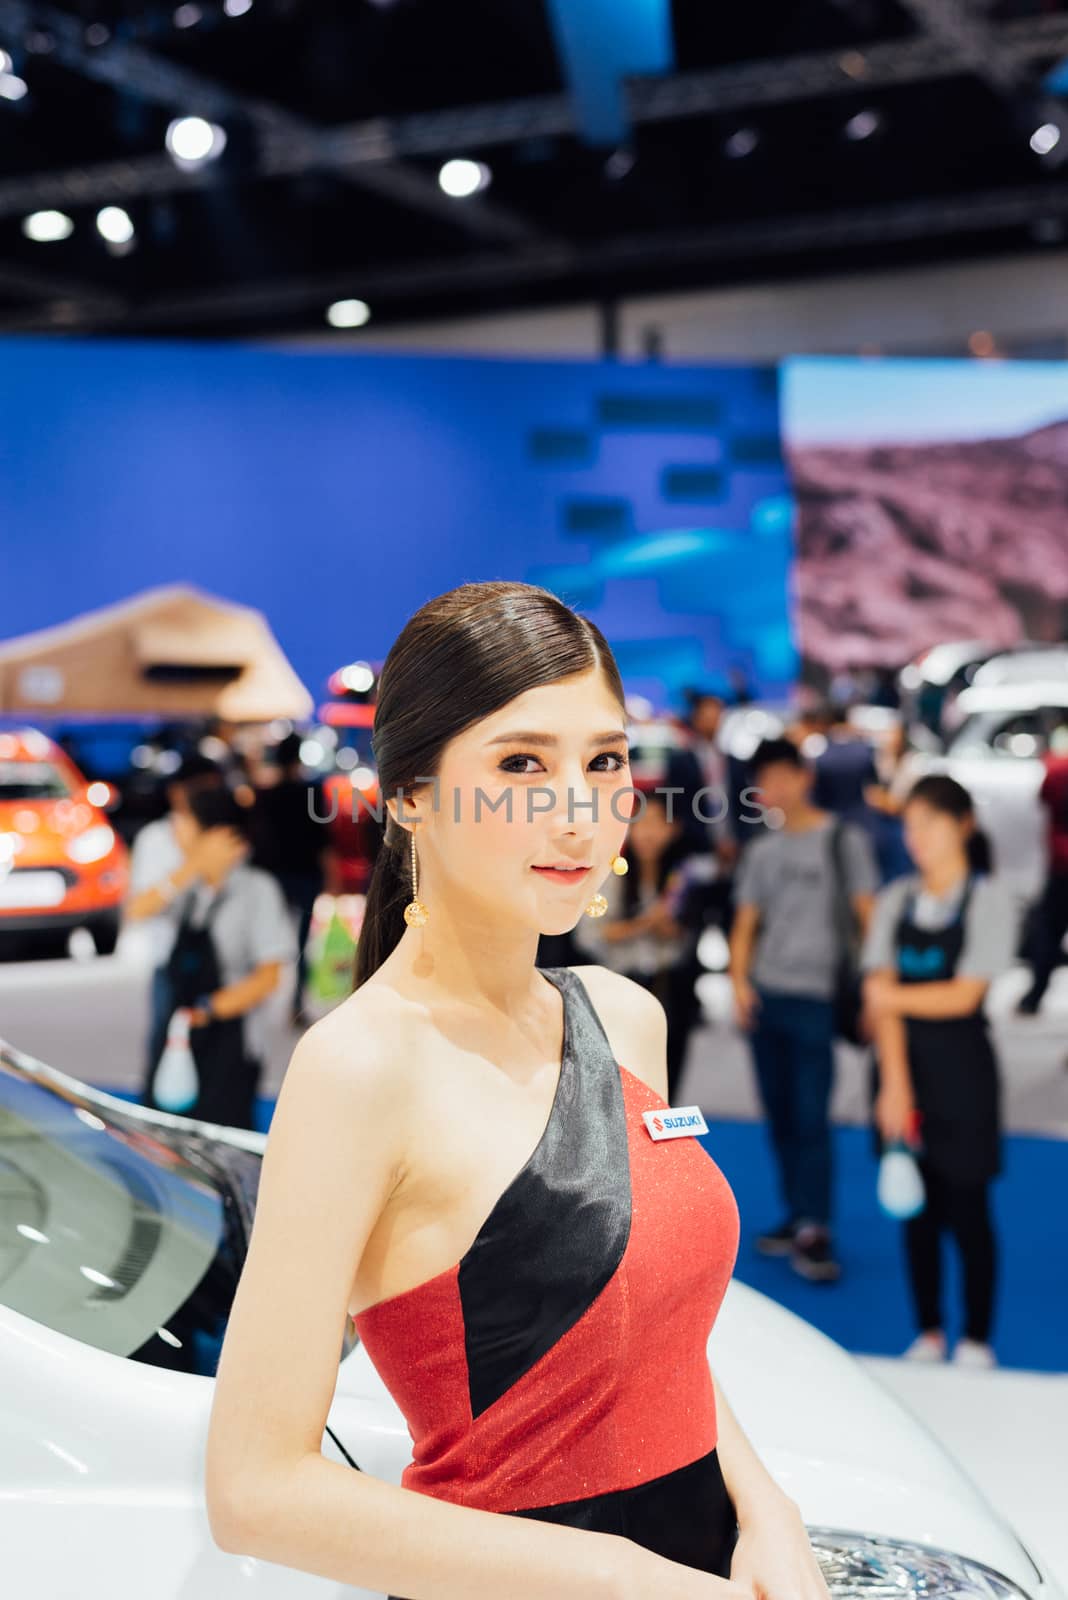 Pretty lady beauty and sexy in car show event by PongMoji